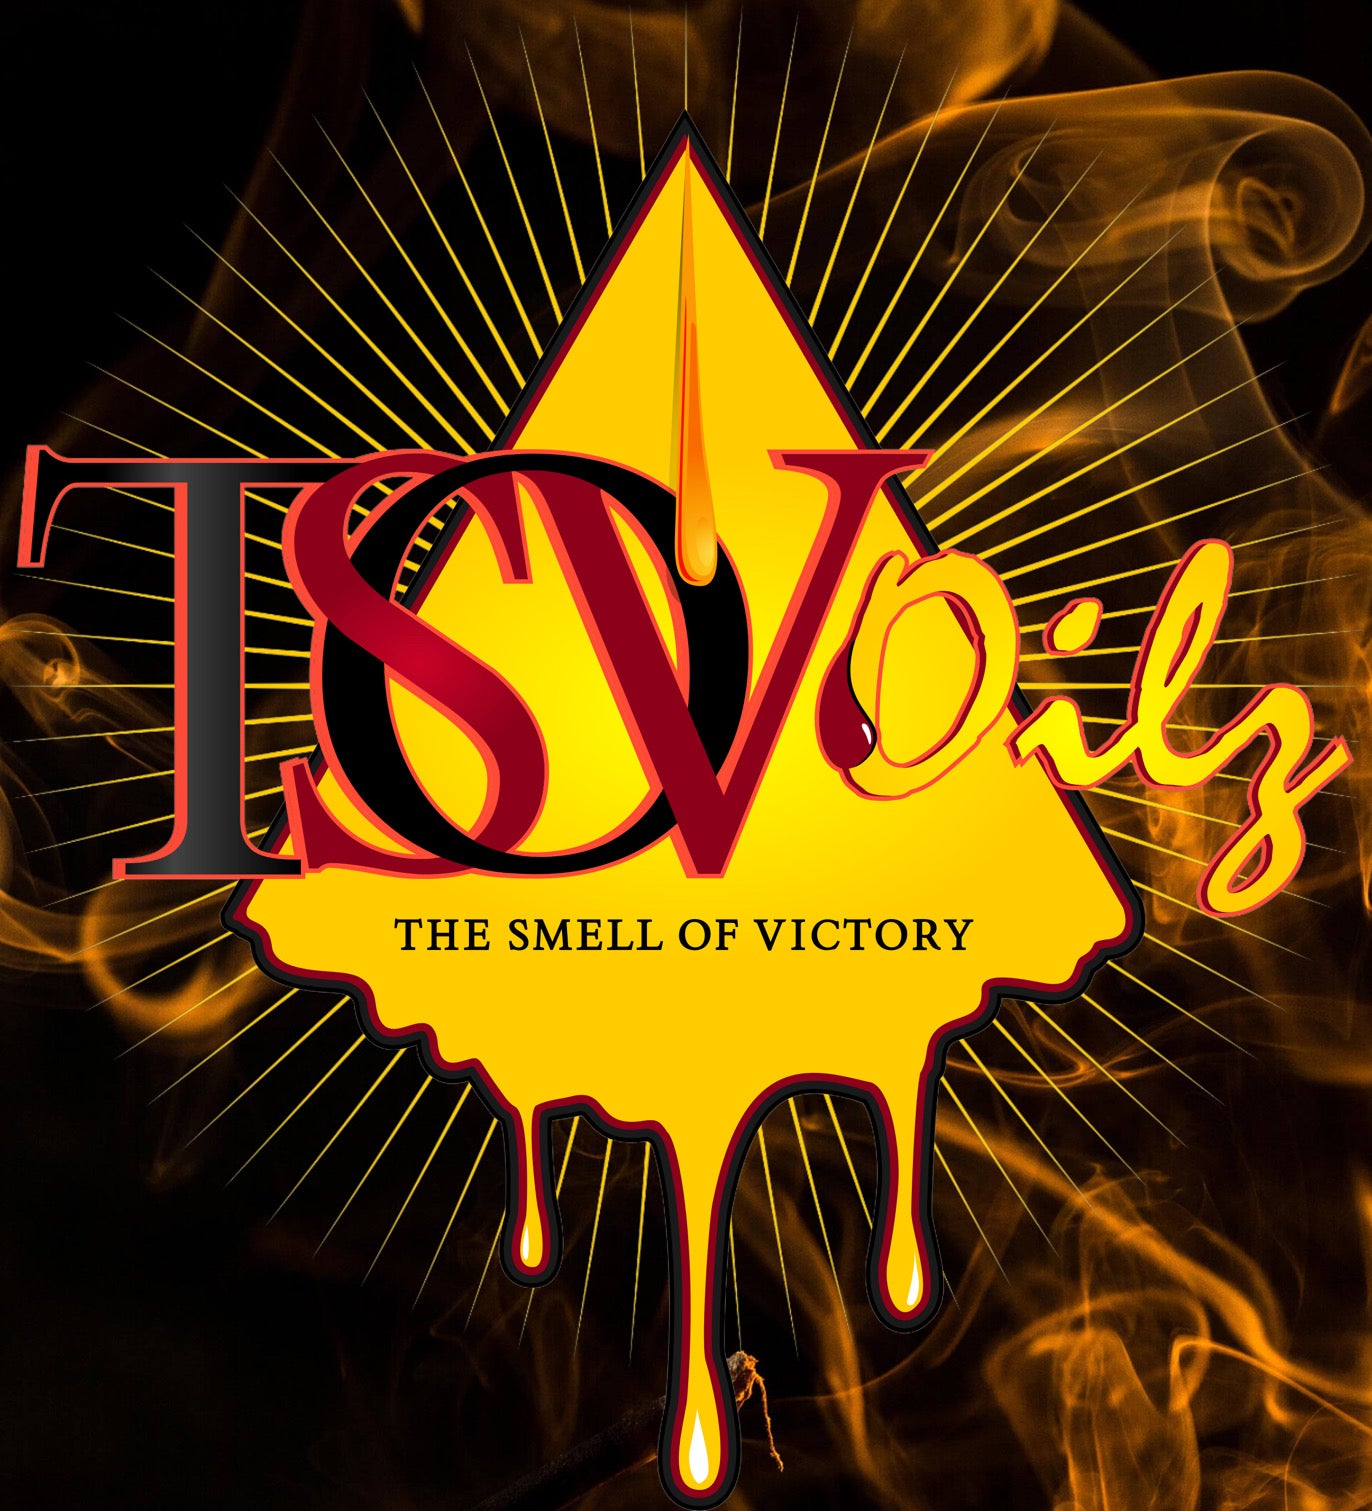 The Smell of Victory